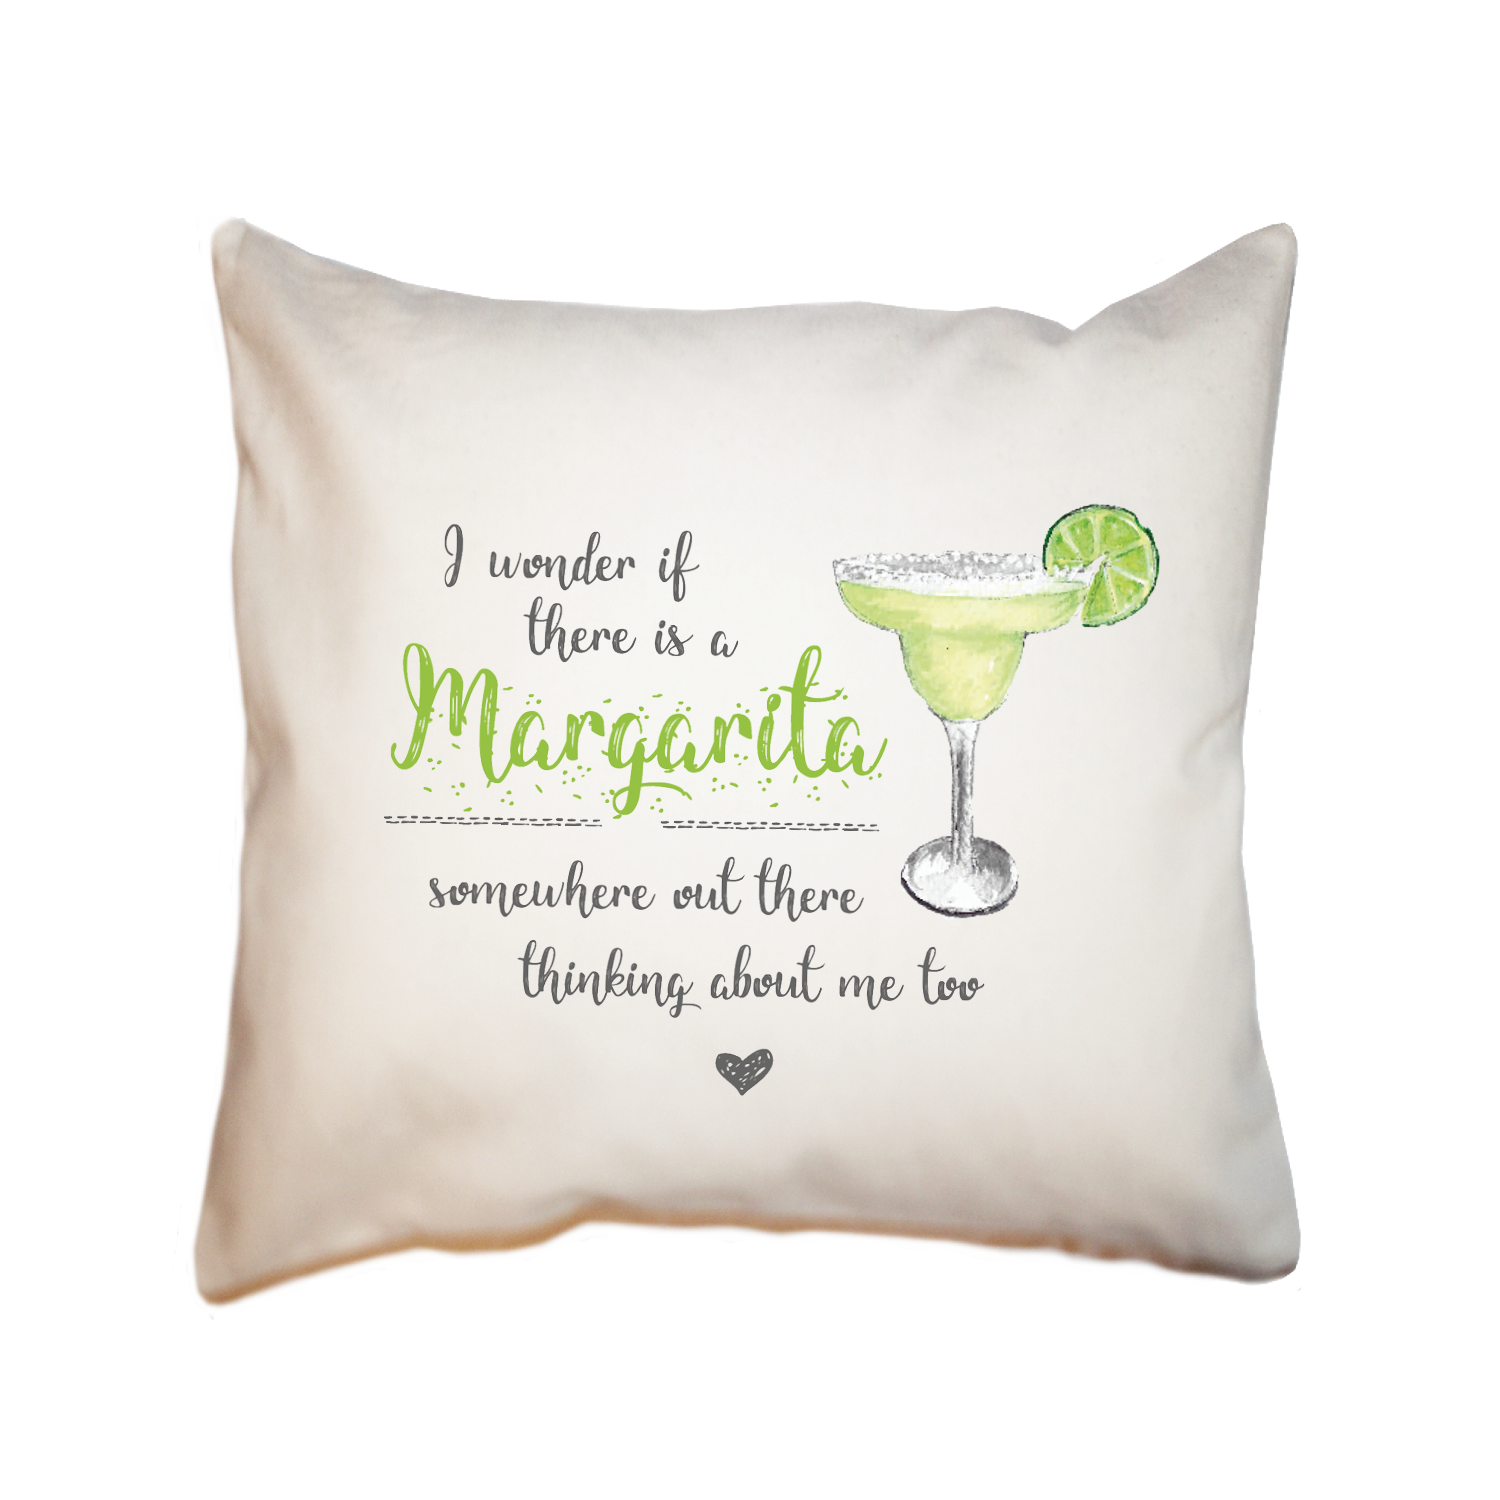 margarita thinking about me too square pillow